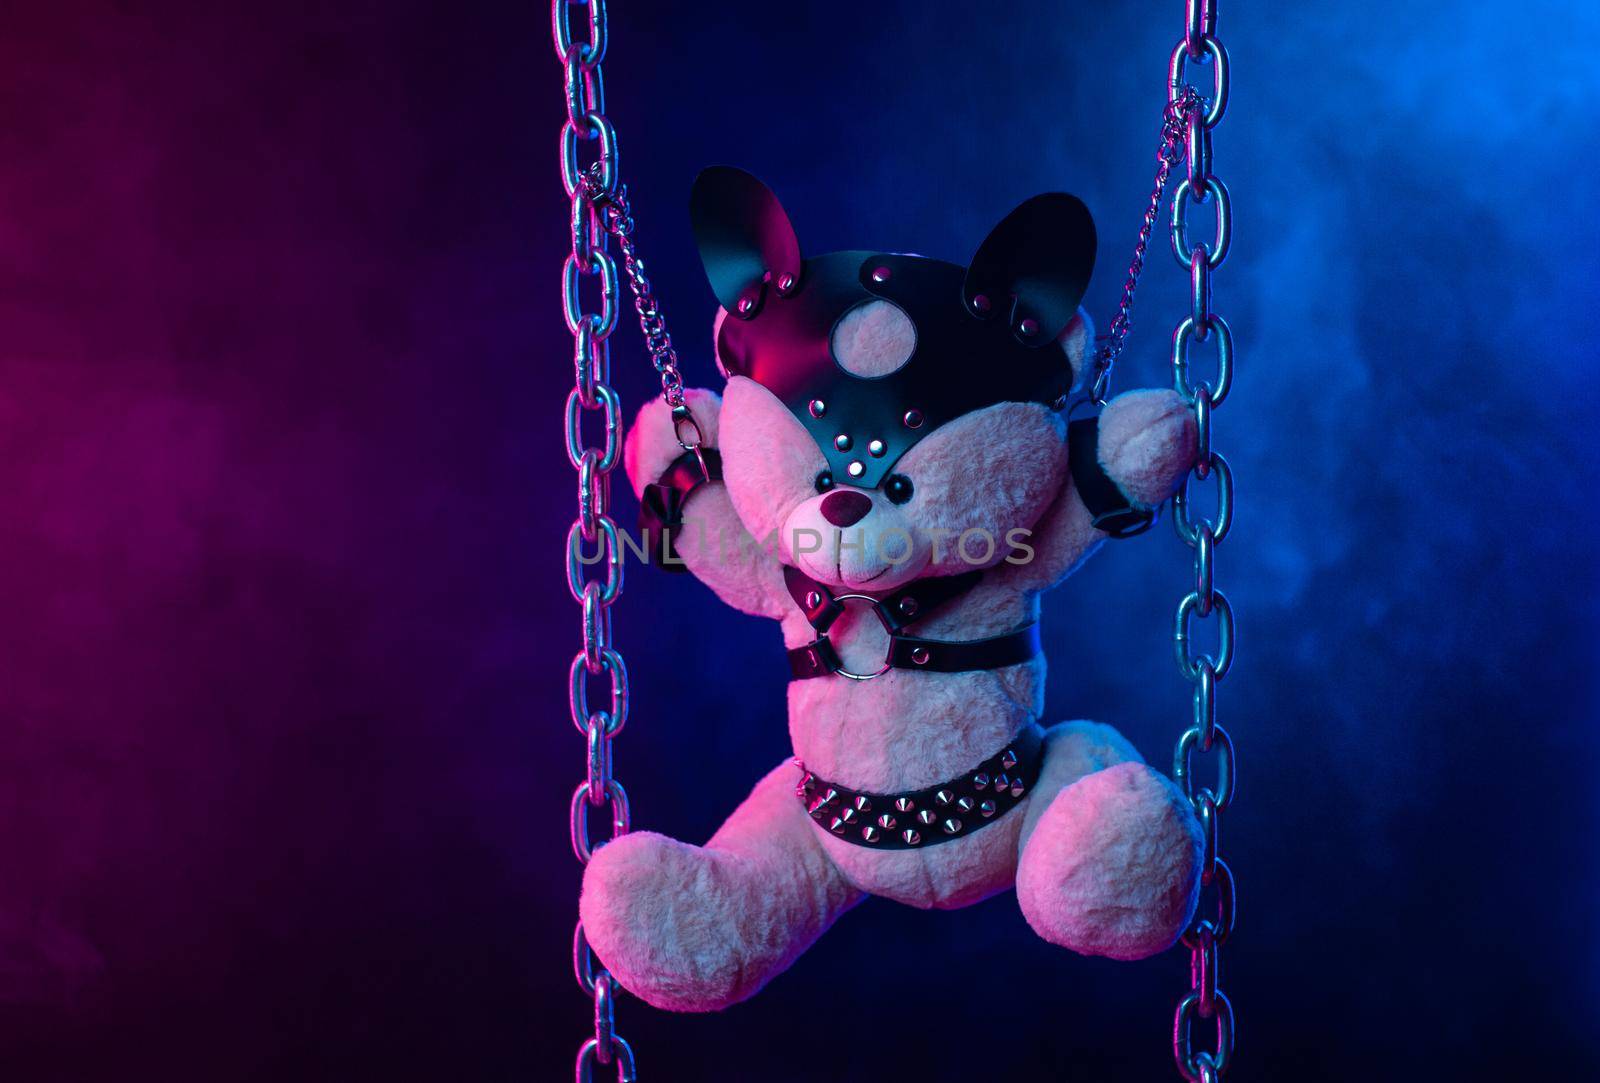 toy bear dressed in leather belts harness accessory for BDSM games on a dark background in neon light by Rotozey